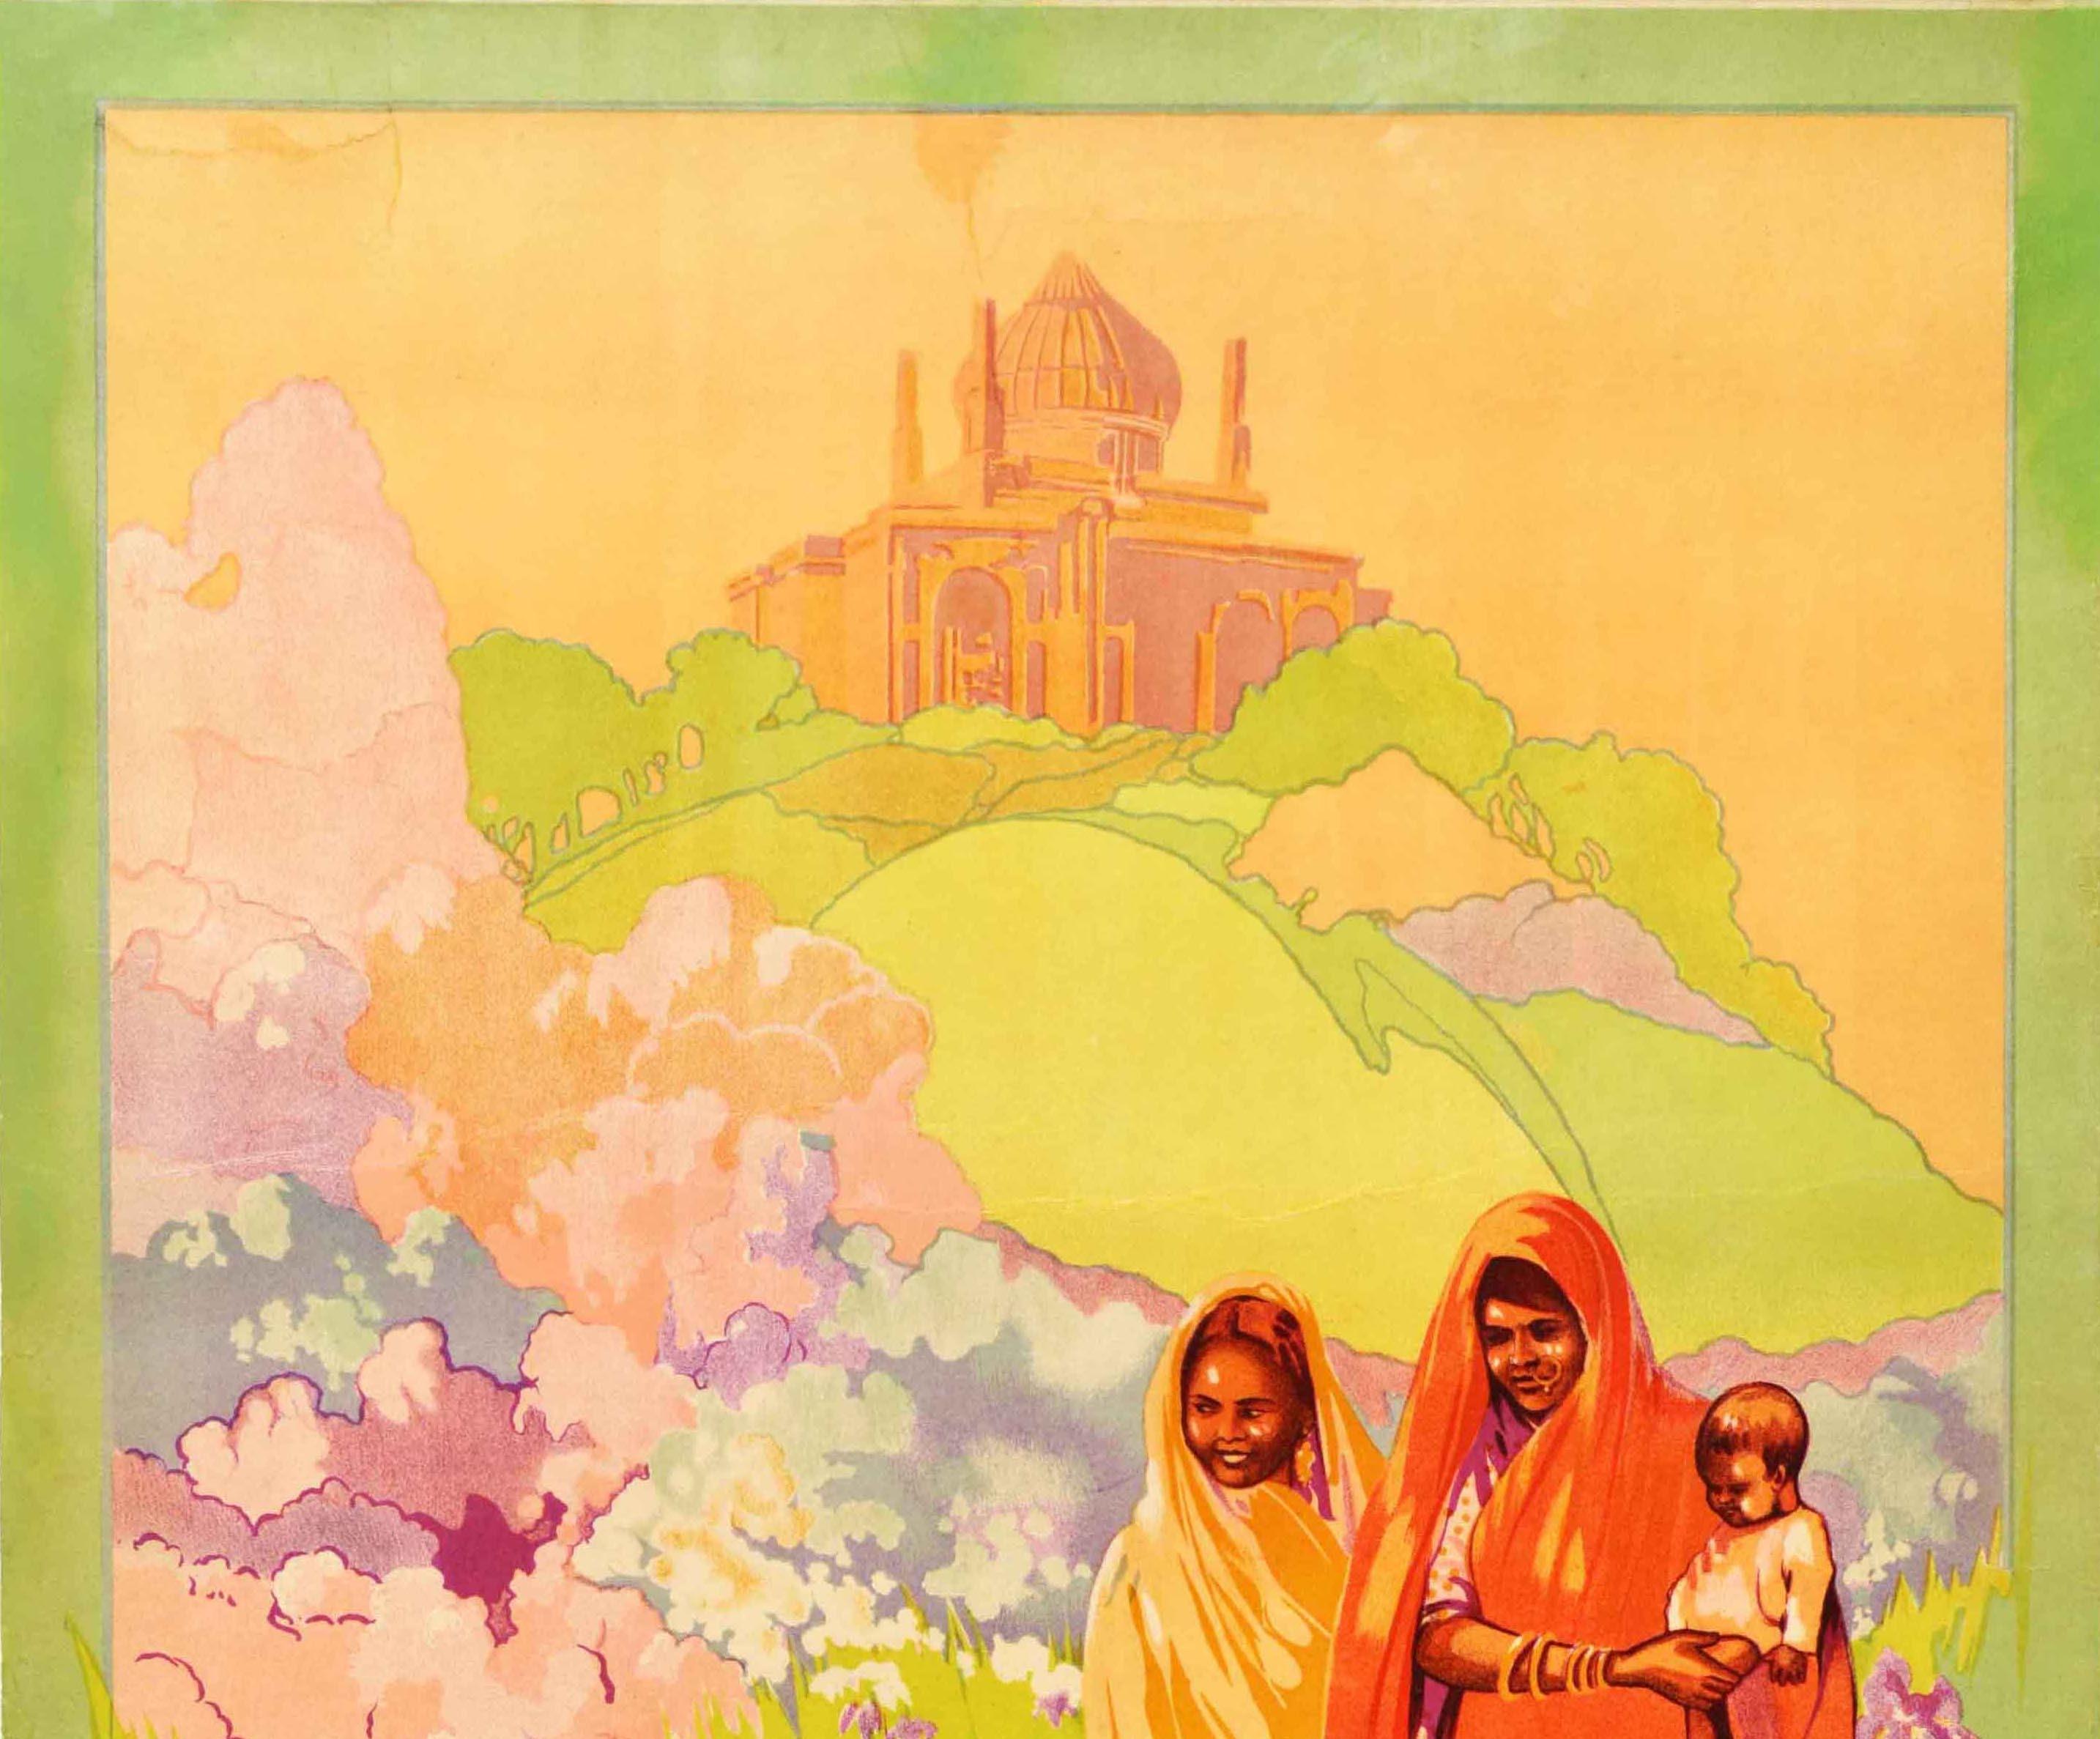 Original vintage Asia travel poster for Lucknow The City of Gardens in Uttar Pradesh India featuring a great image of two ladies in traditional clothing, one holding a young baby on her side, walking through a field of purple iris flowers and grass